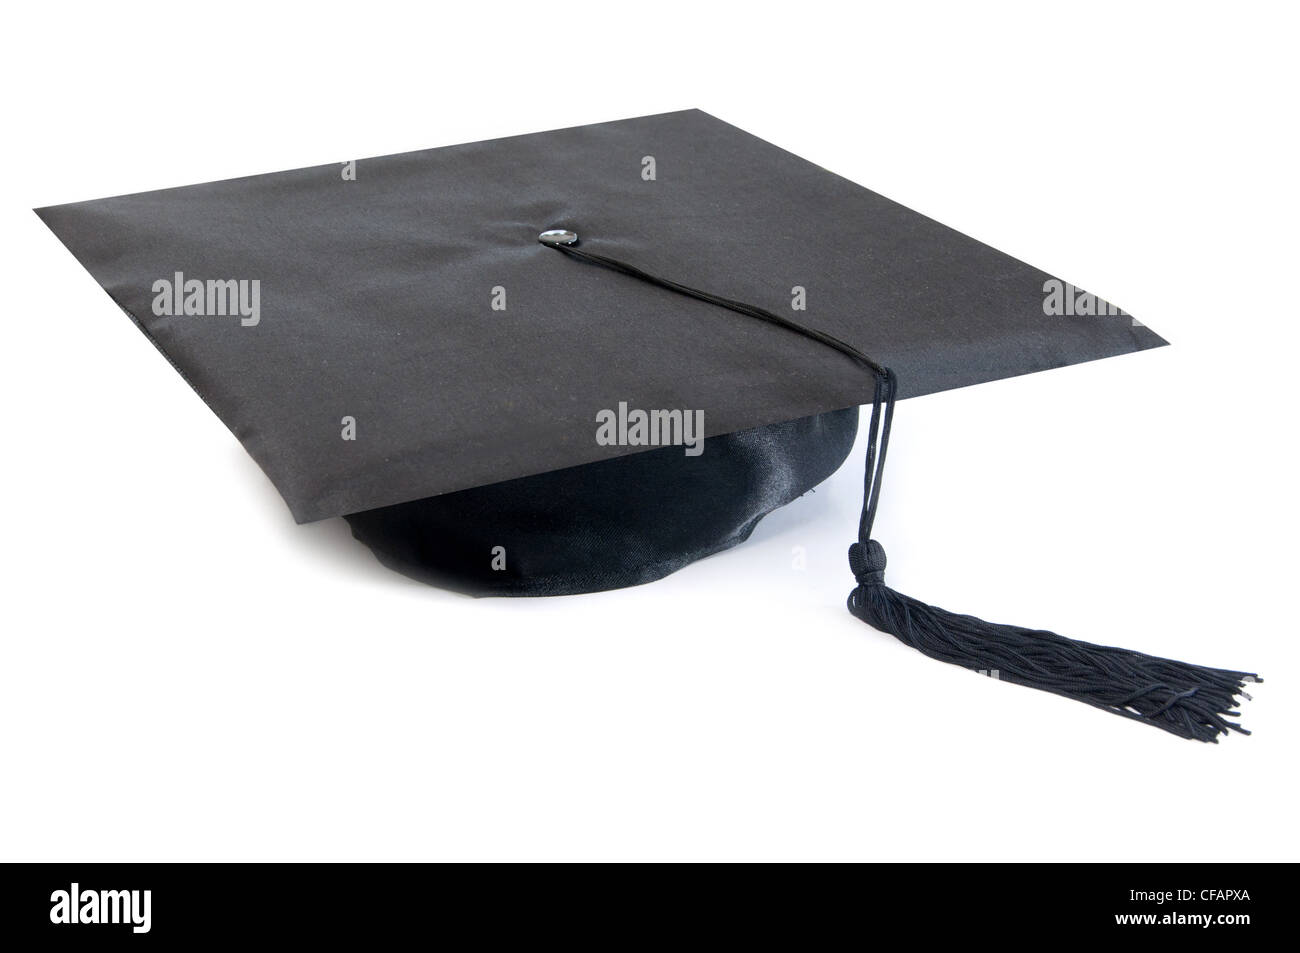 Graduation Hat Stock Photos and Pictures - 235,438 Images